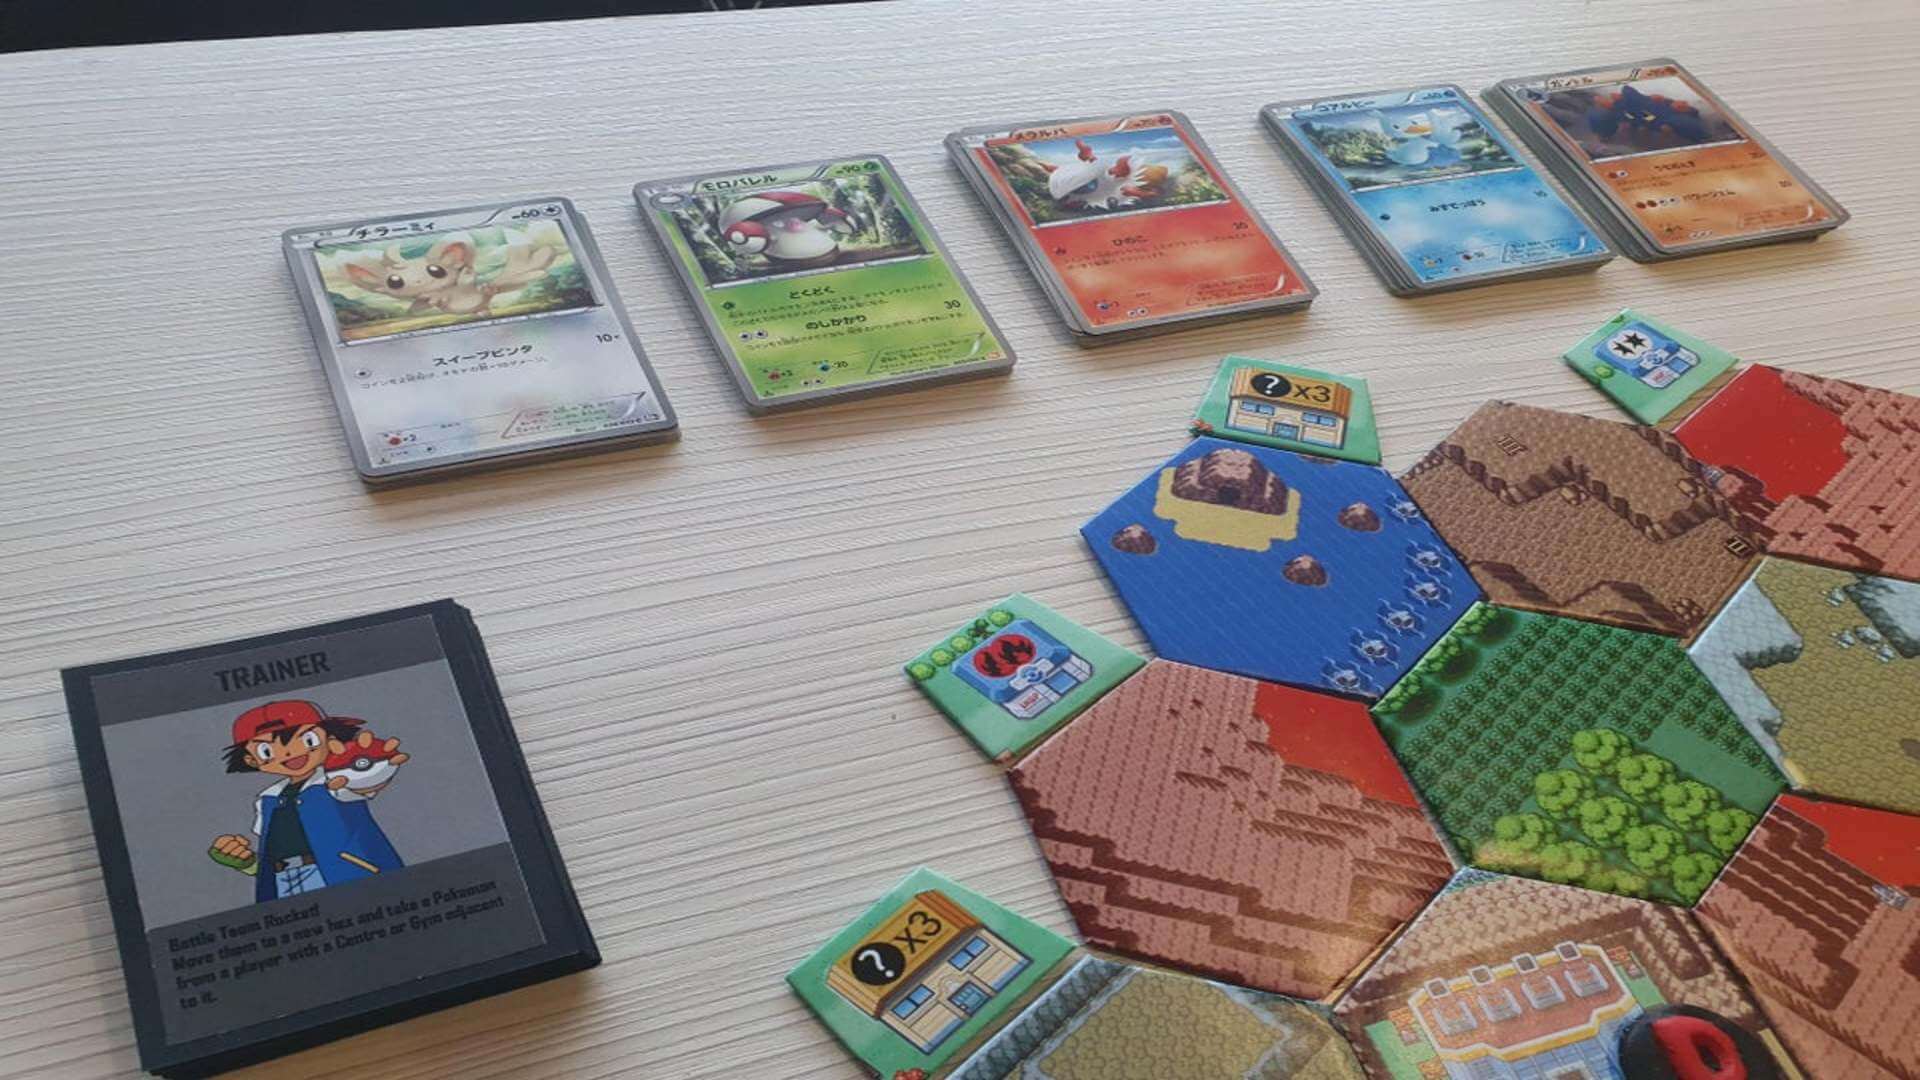 A closer look at the "resources" from the Pokemon Settlers of Catan fan project.